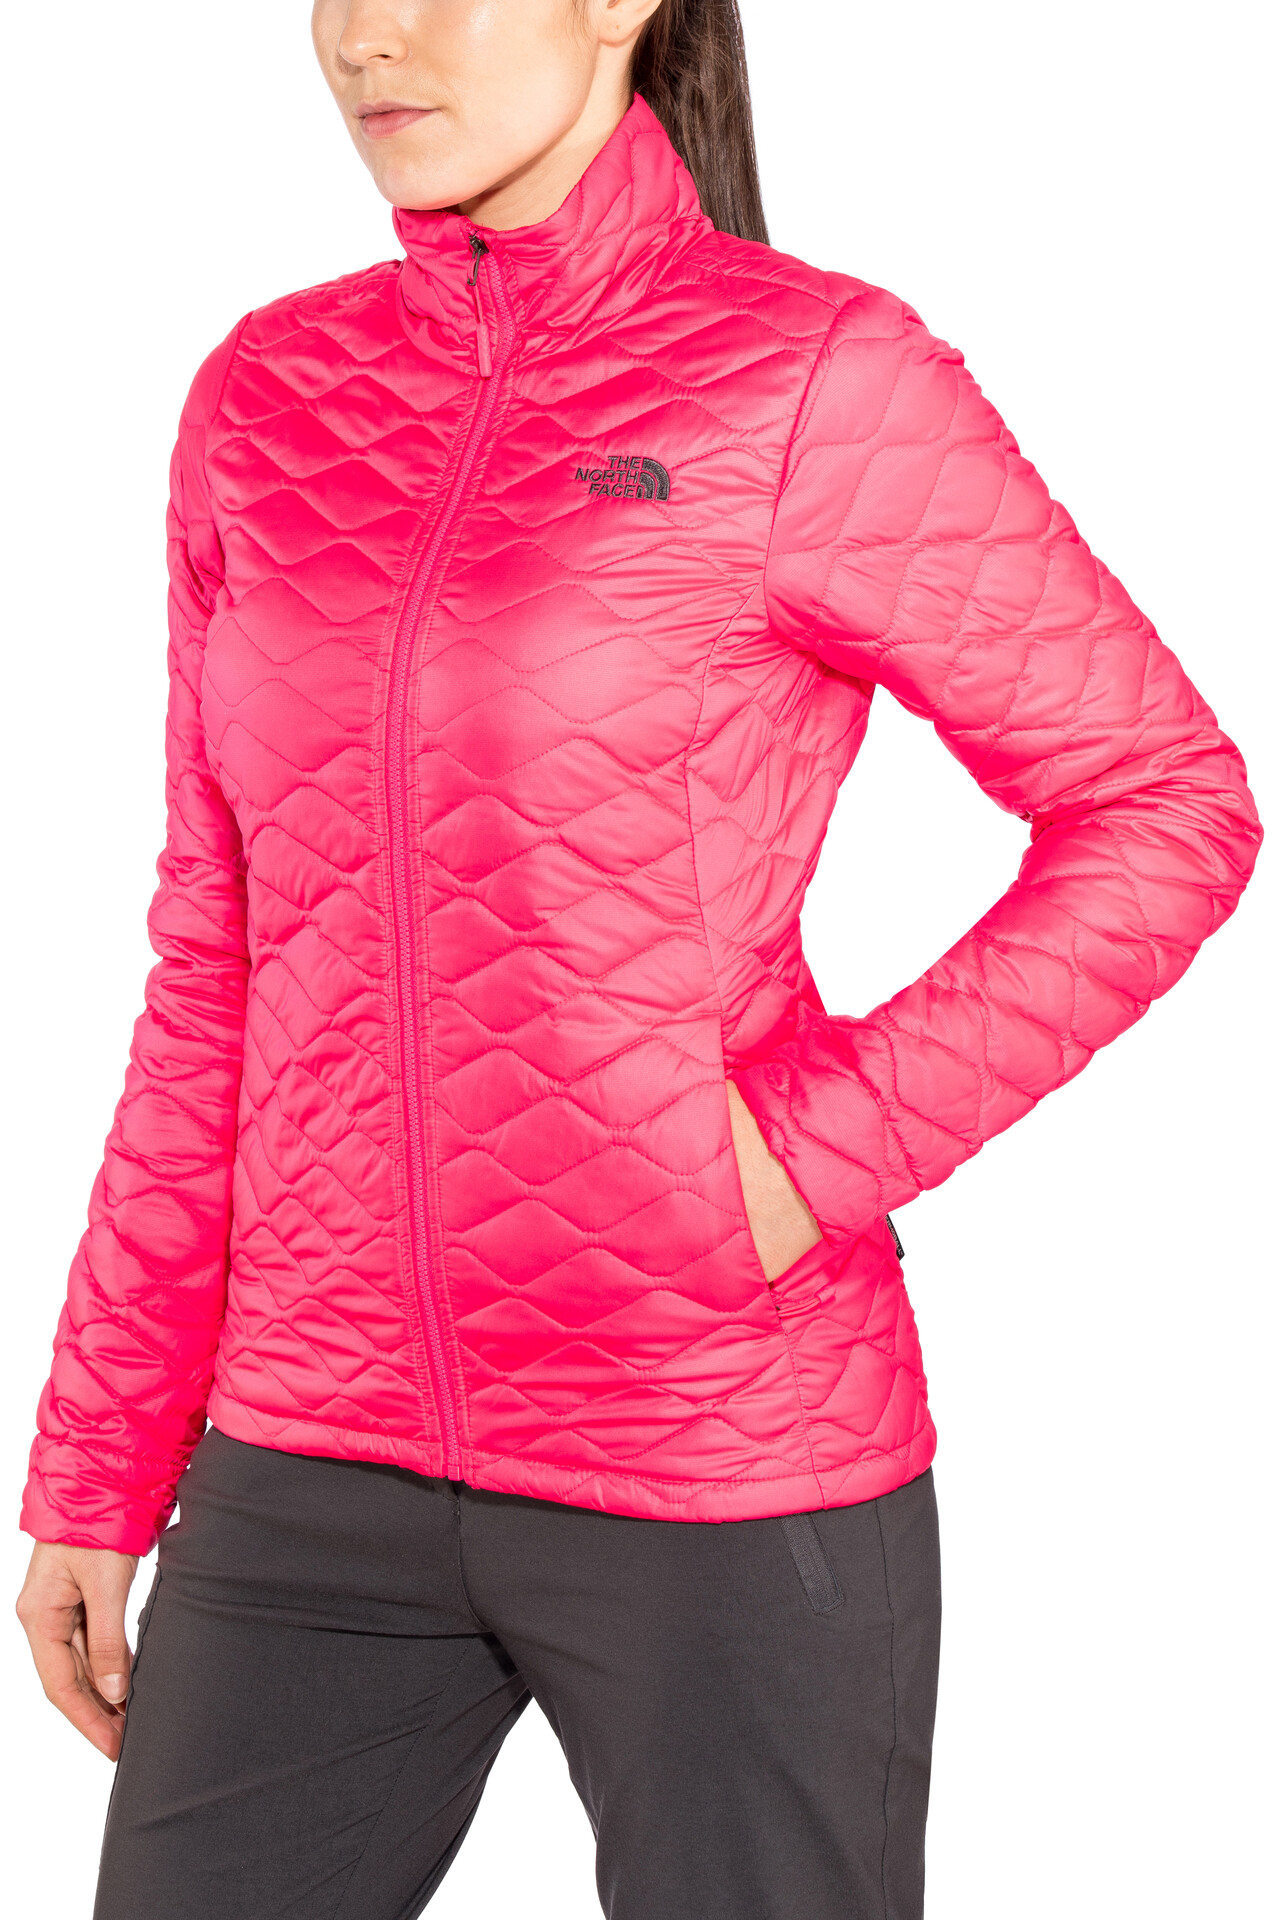 north face pink jacket womens